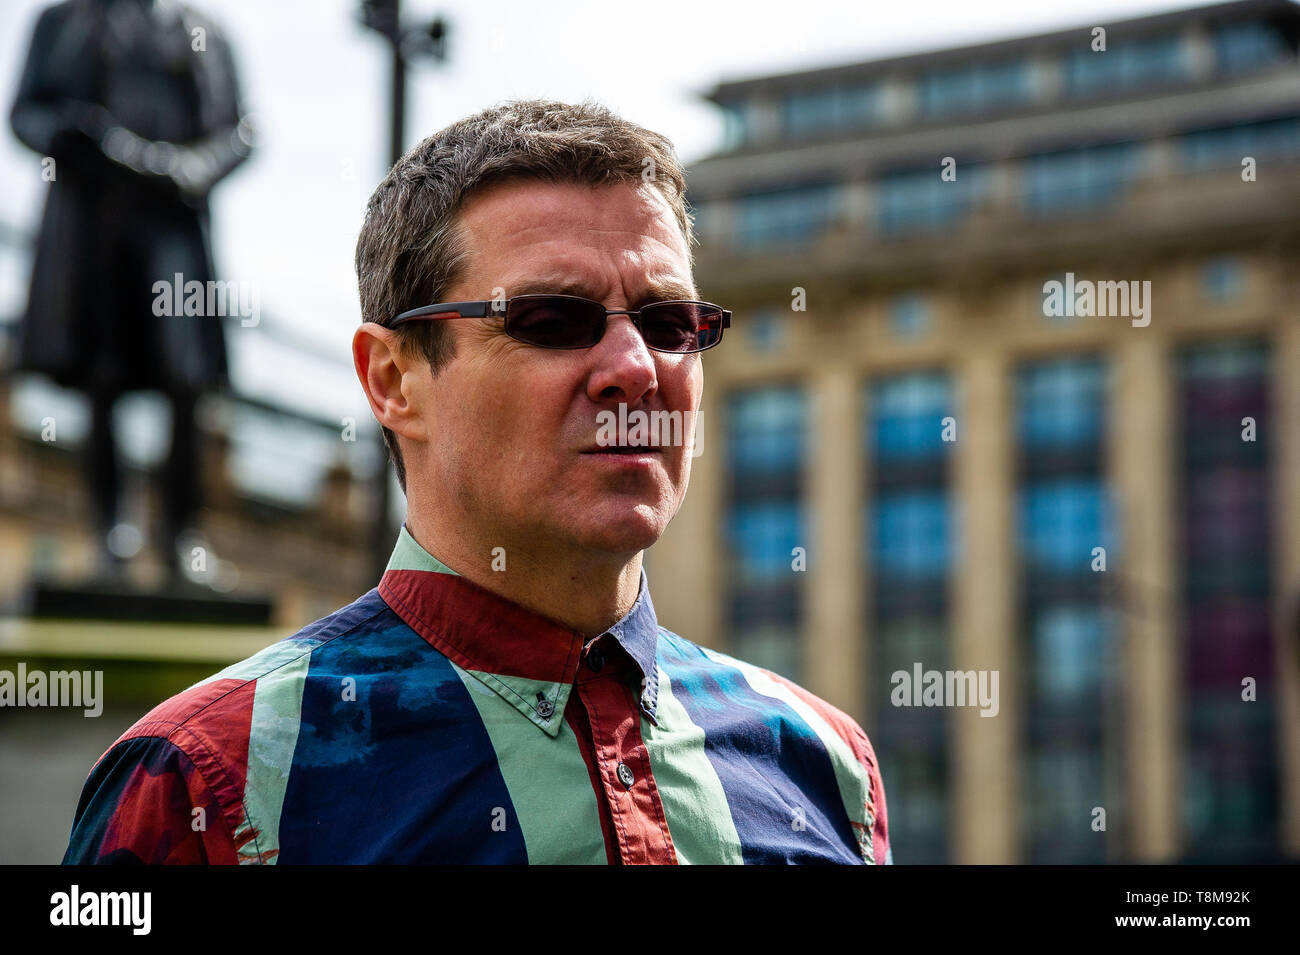 A Force For Good leader Alistair McConnachie seen looking angry during is speech at the Force For Good counter-protest against the AUOB march. Thousands of Scottish independence supporters marched through Glasgow as part of the ‘all under one banner’ (AUOB) protest, as the coalition aims to run such event until Scotland is ‘free’. Stock Photo